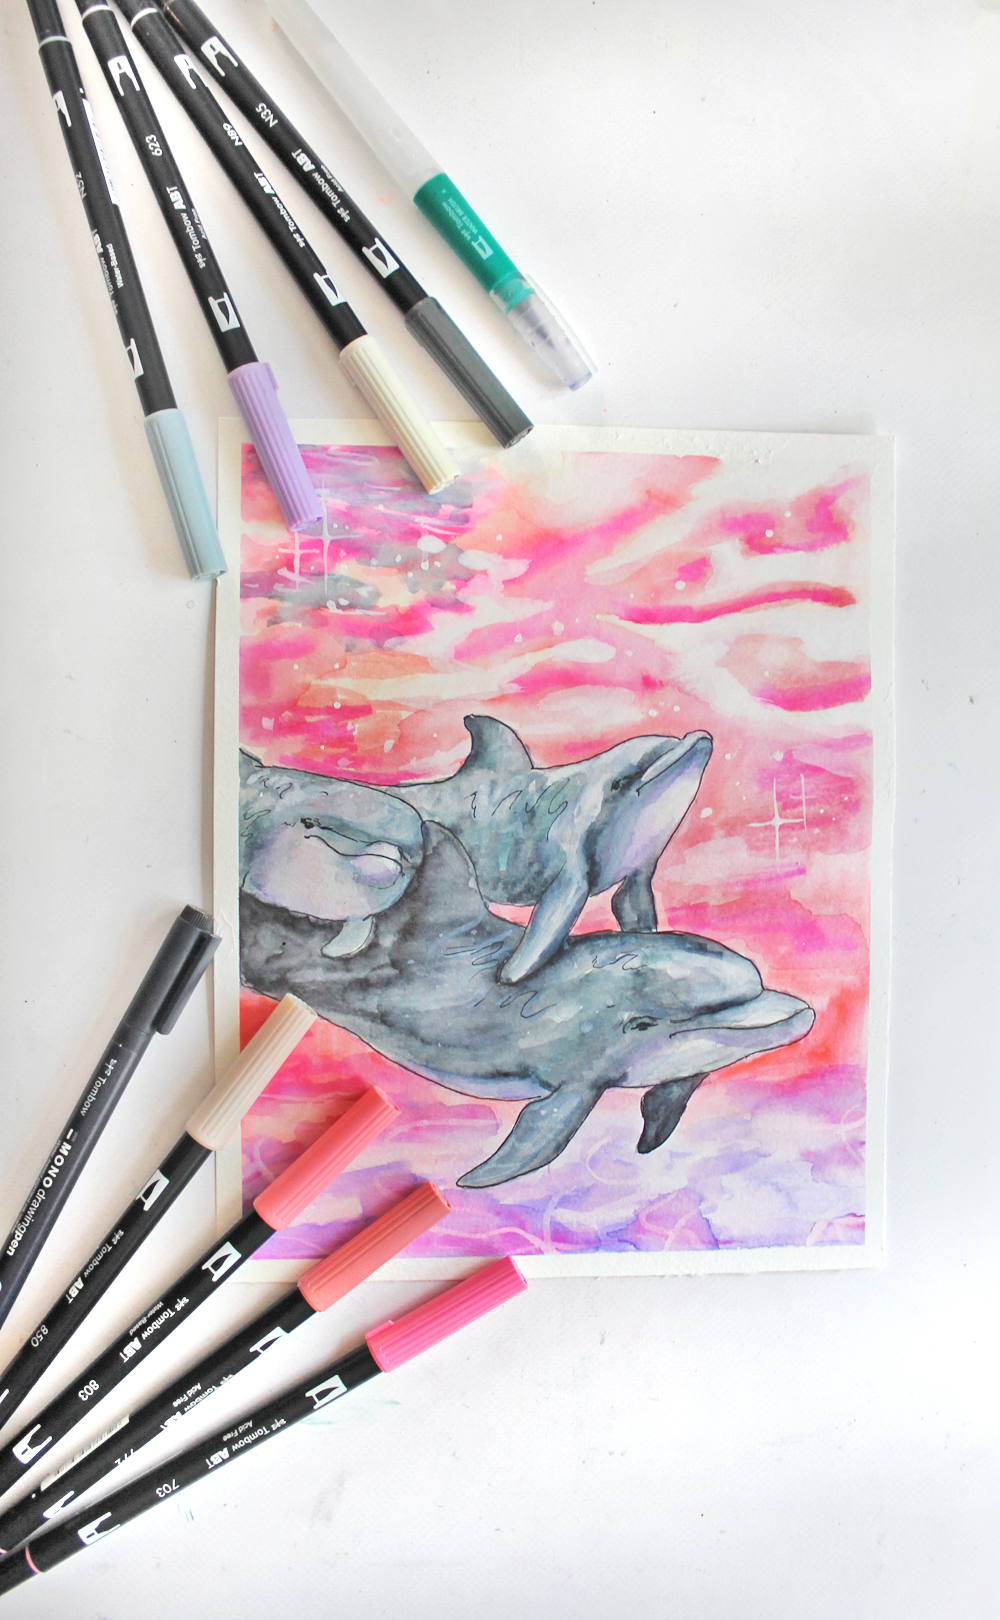 http://blog.tombowusa.com/wp-content/uploads/files/Katie_Tombow-Watercolor-Dolphin-Painting-1.jpg